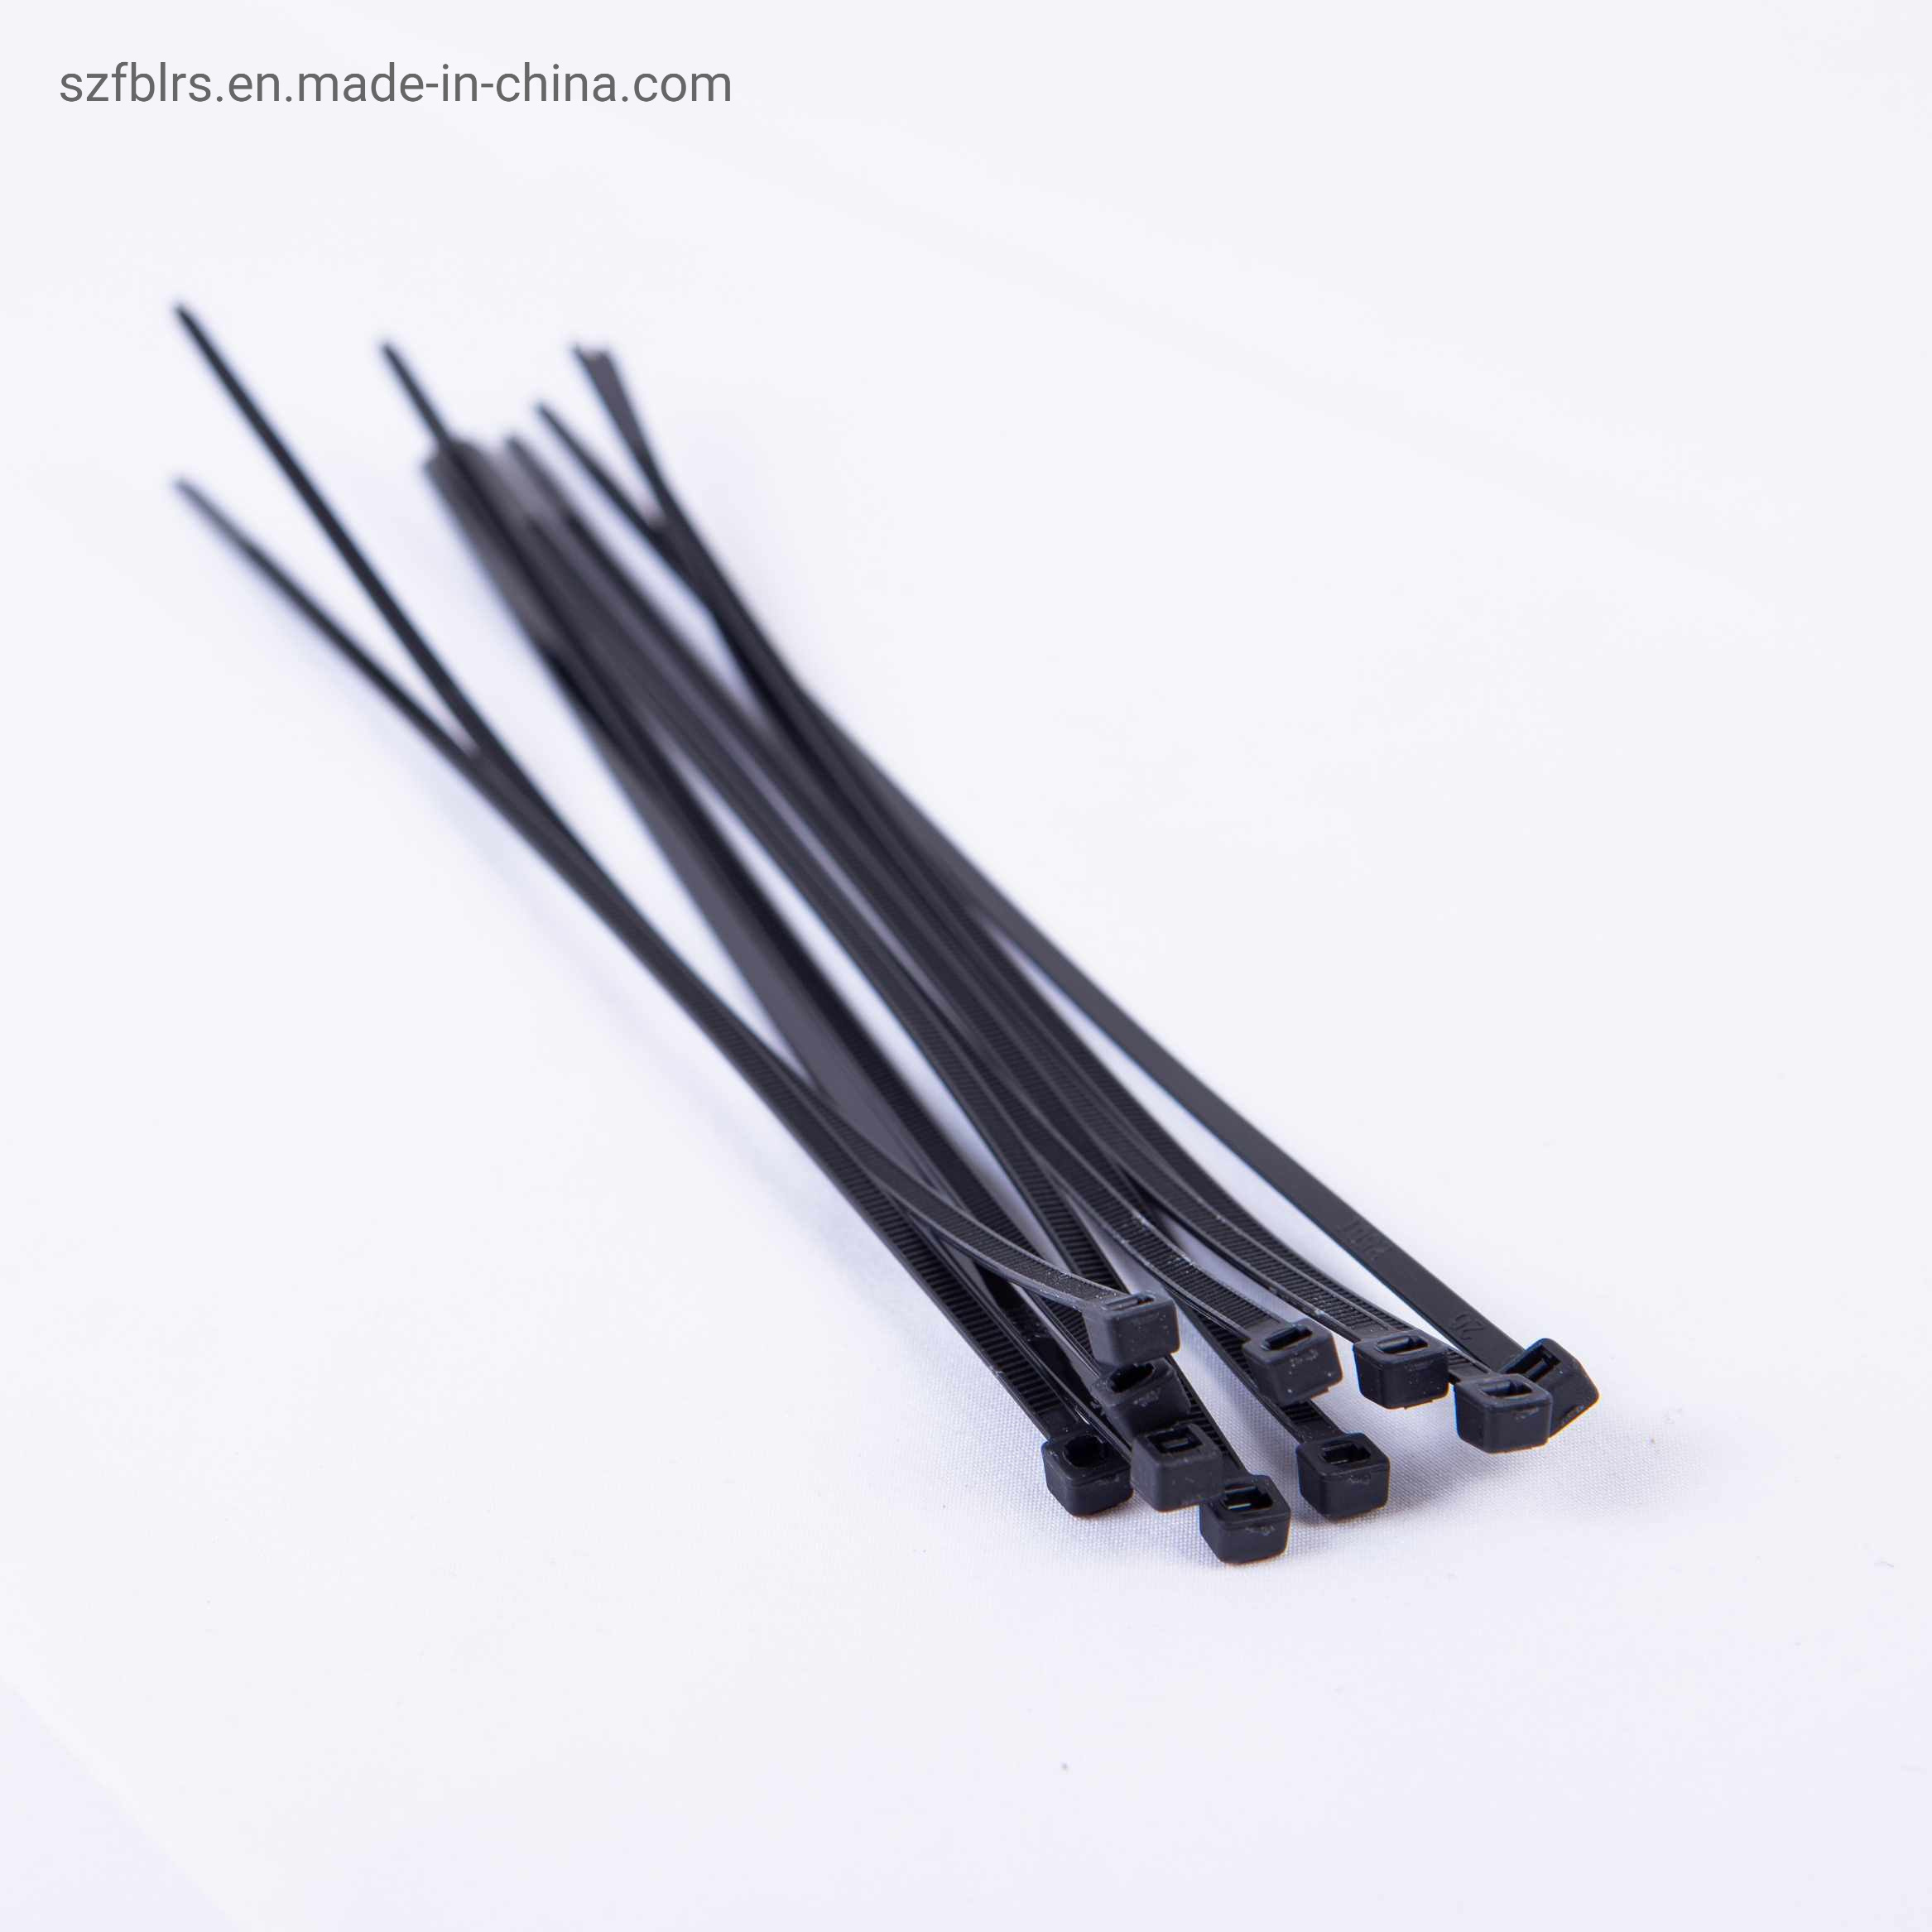 Wholesale 8*400 Plastic Cable Ties New Light Plastic Cable Ties Strapping